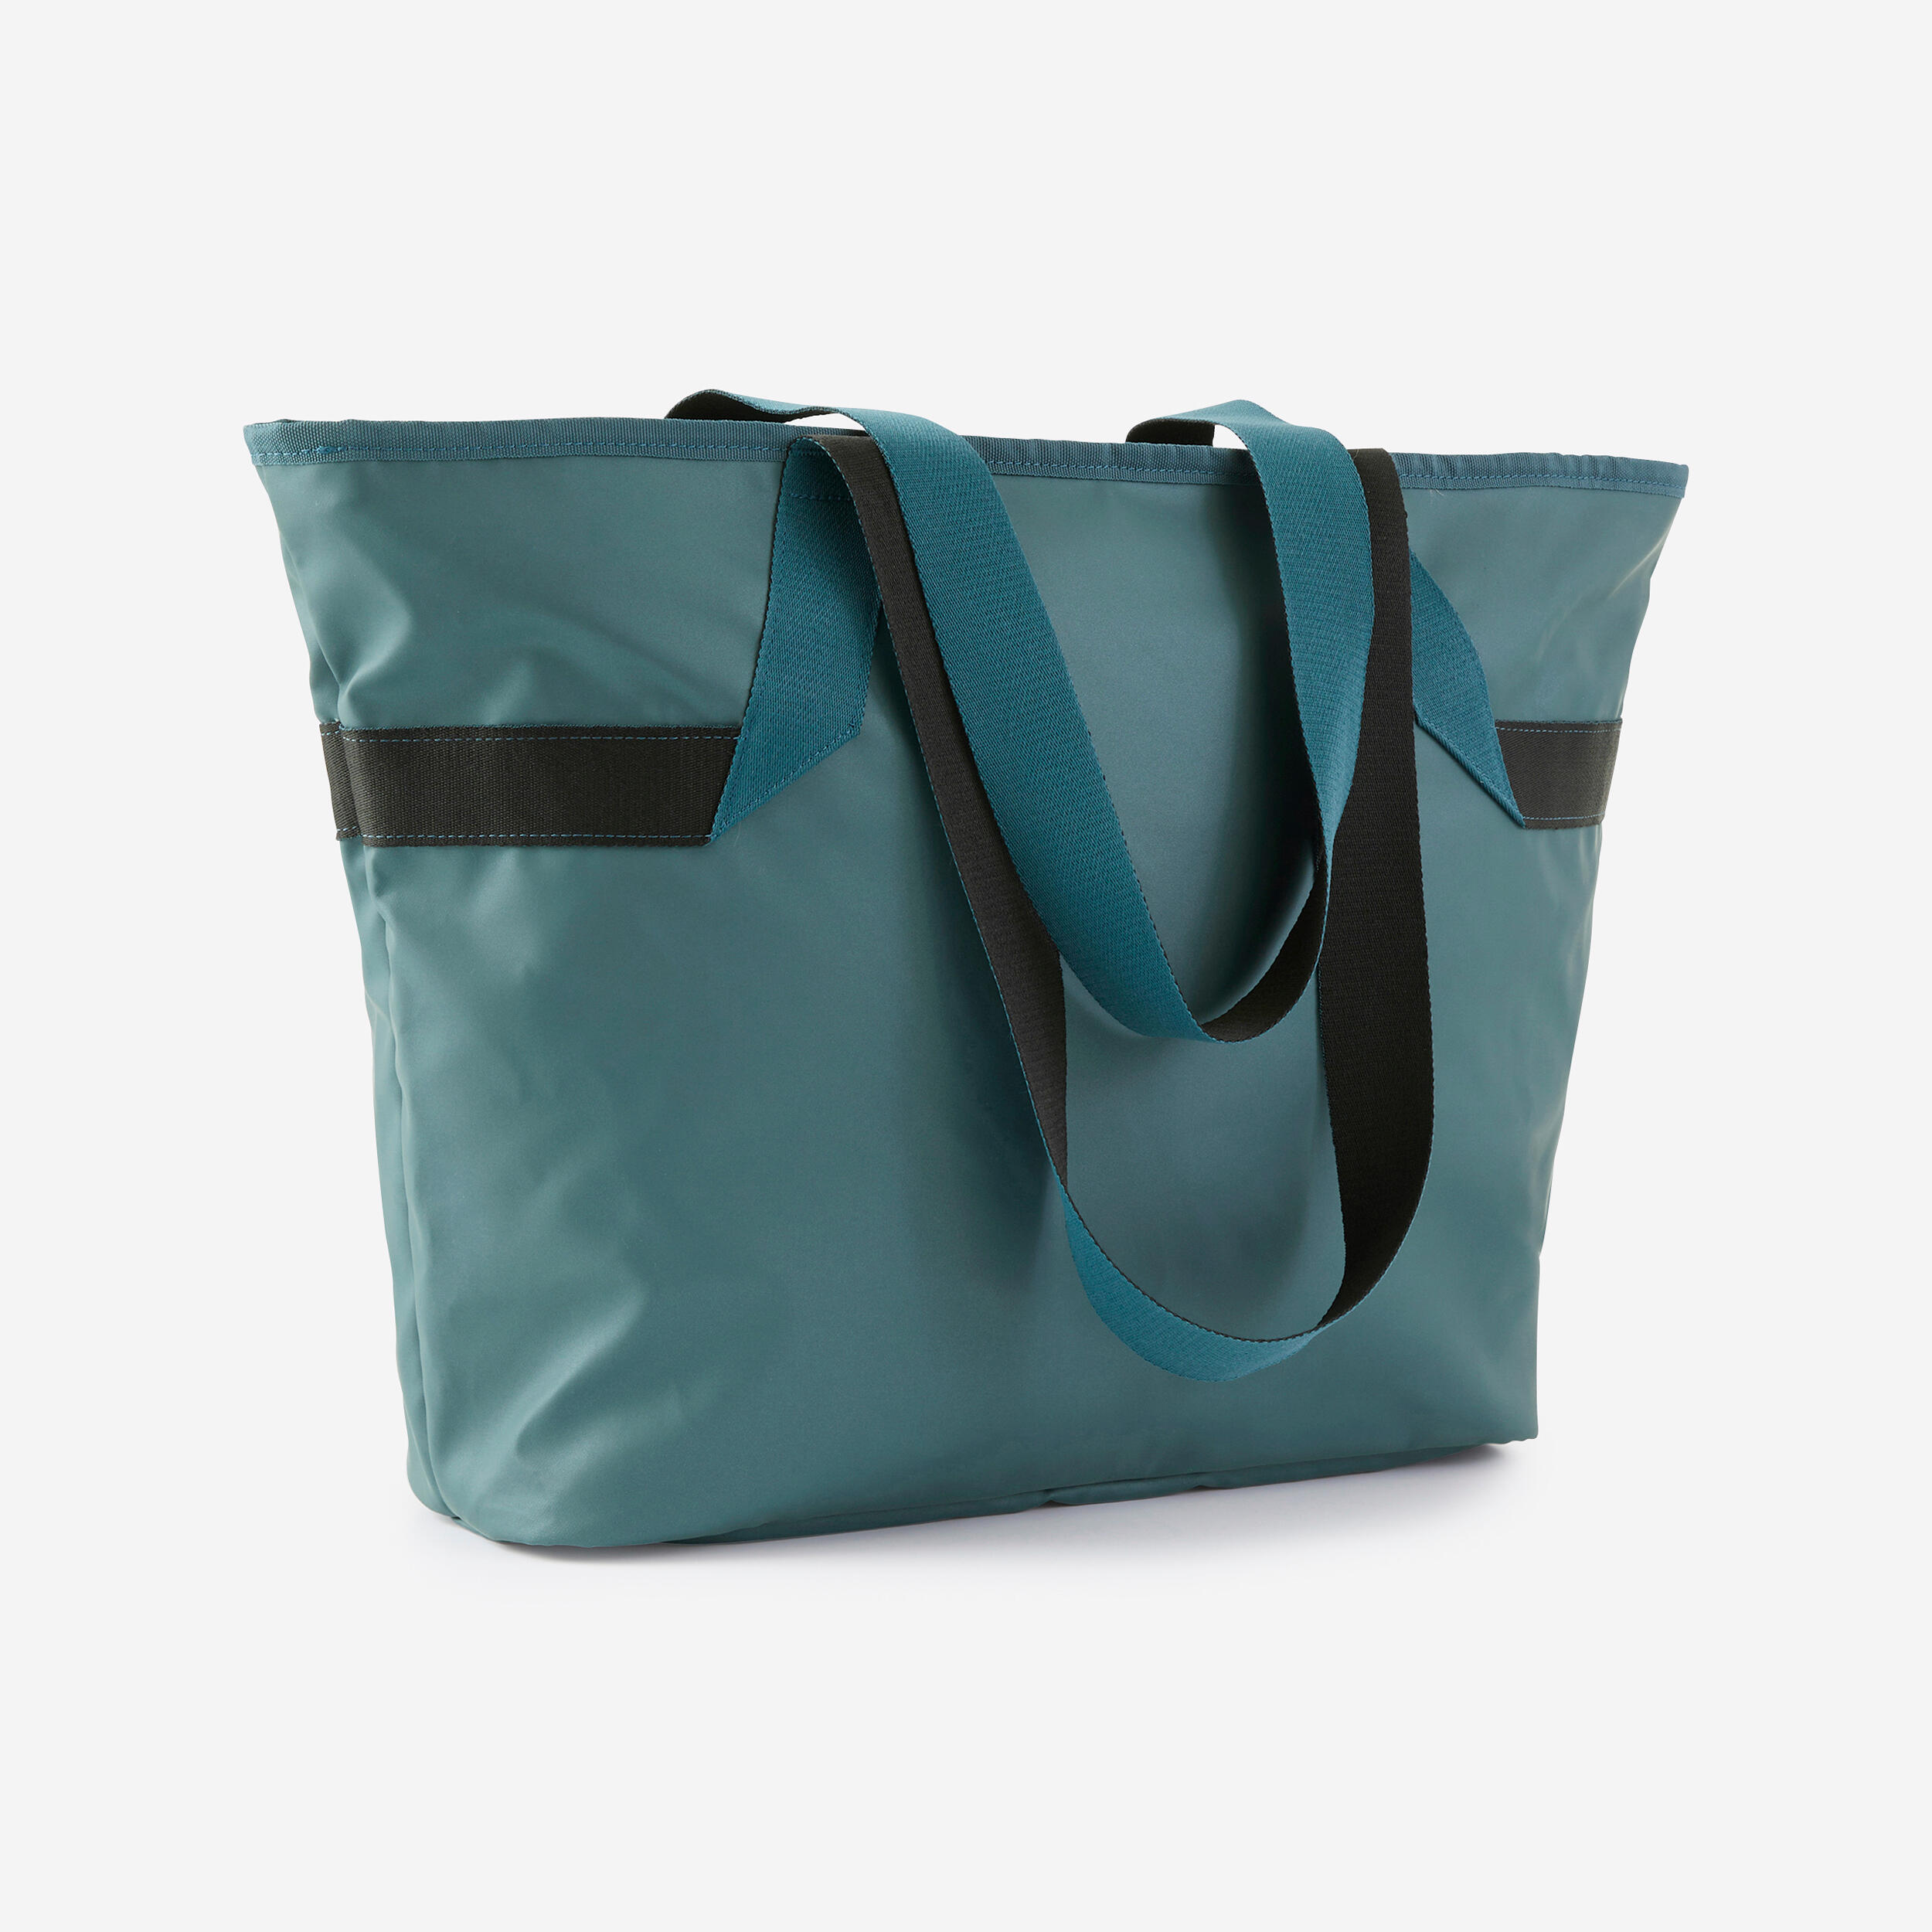 Women's 25 L Bag with Pockets - Turquoise 4/9